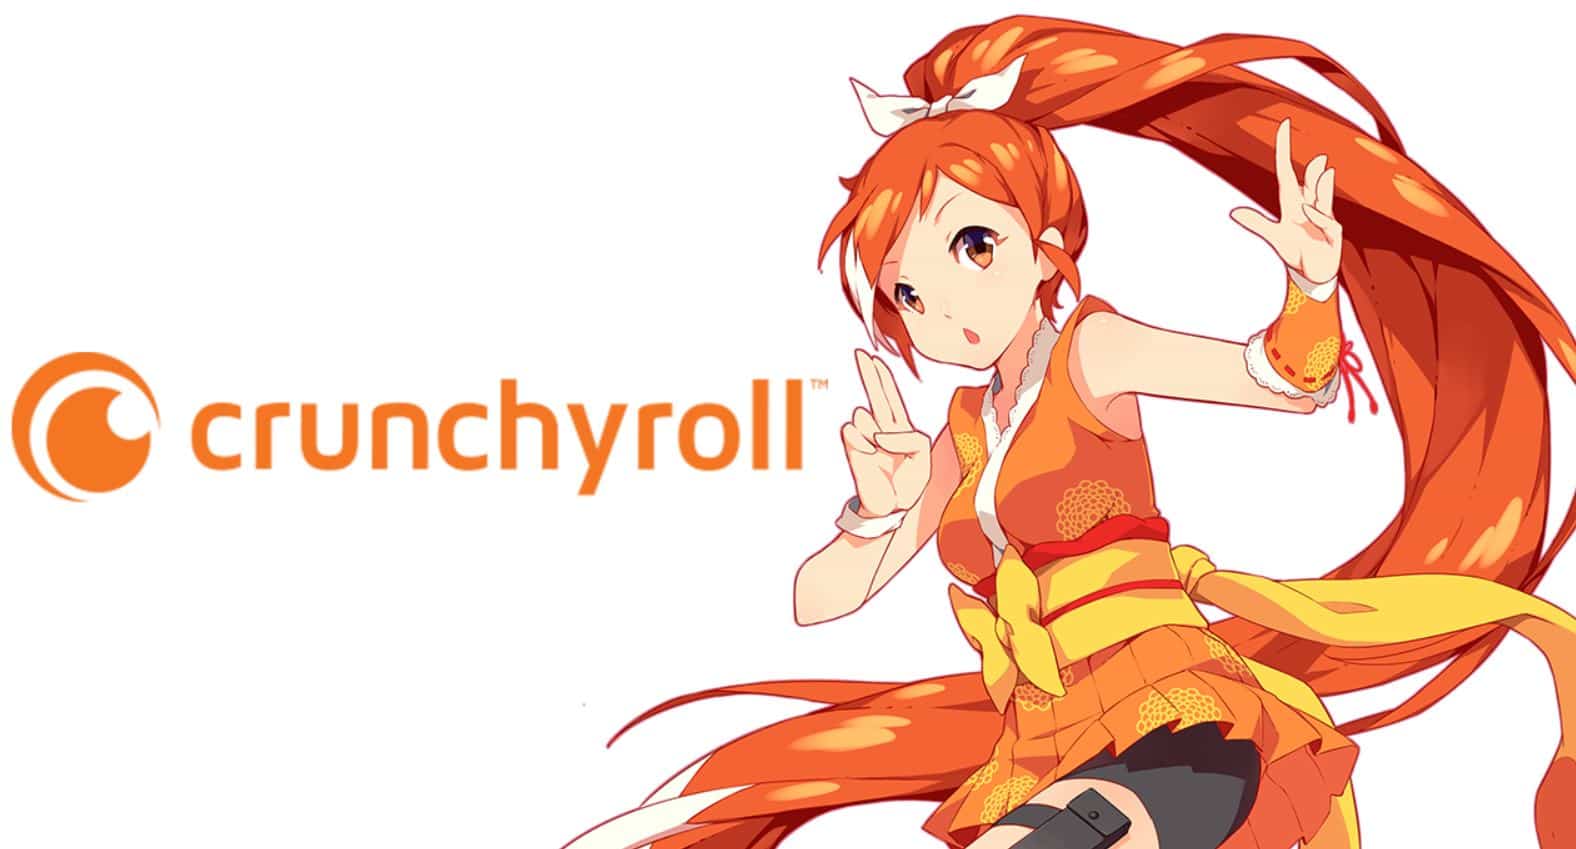 Crunchyroll PS4 Not Working? Get The Latest Here - Universe